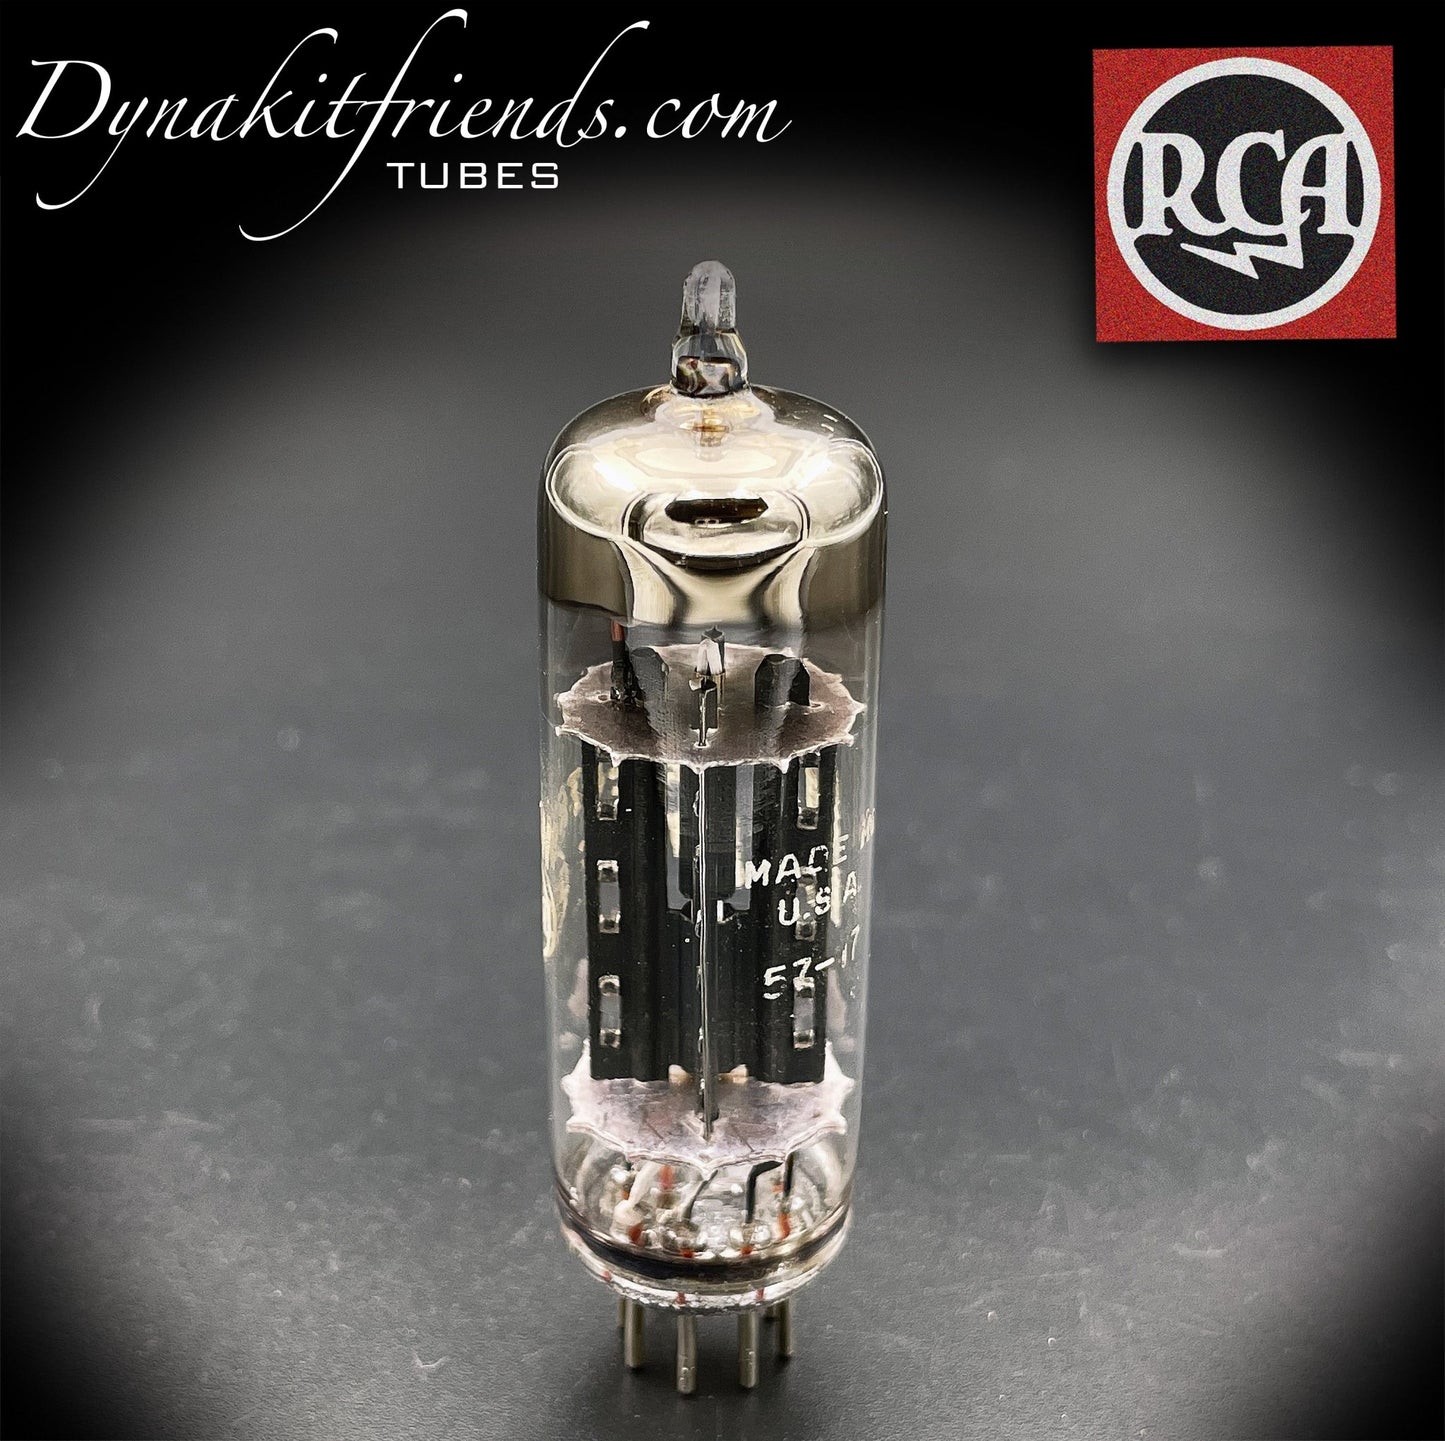 12X4 RCA @ Test NOS Black Plates [] Getter Tube Rectifier Made in USA '57 - Vacuum Tubes Treasures